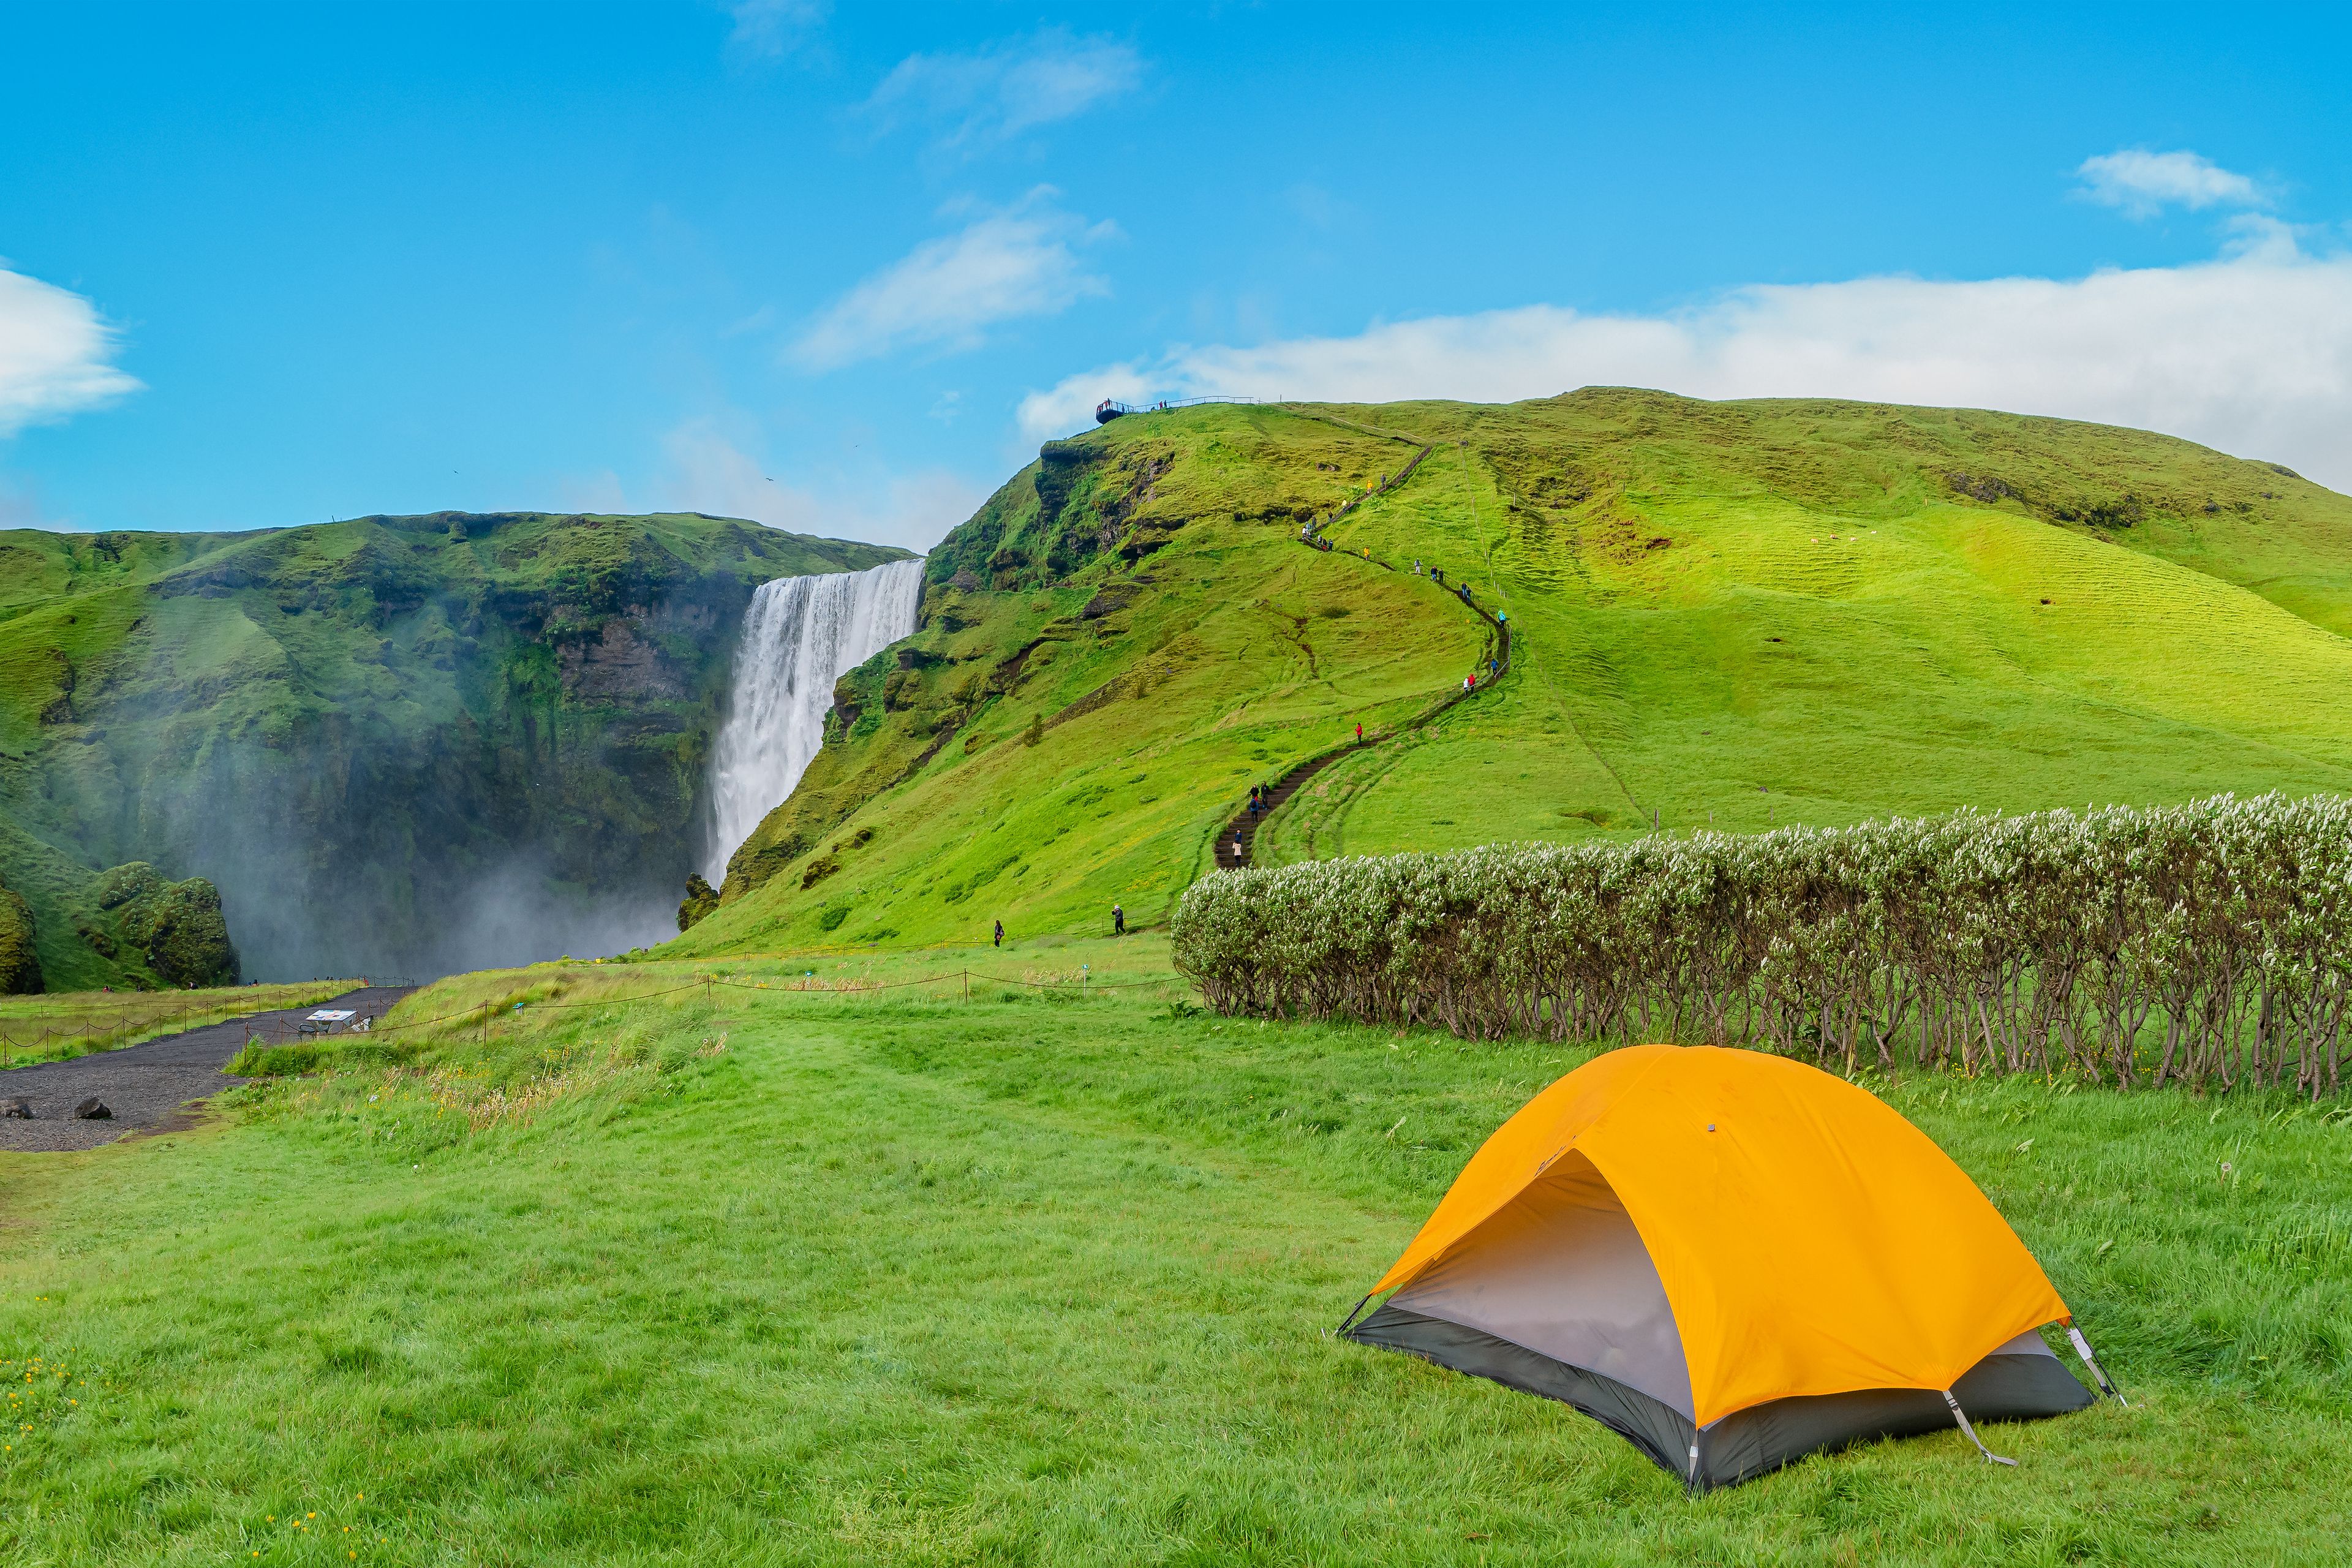 Panoramic view over camping site with orange tent, and tourists in front of famous Skogafoss waterfall, while hiking in Iceland, summer, scenic view.